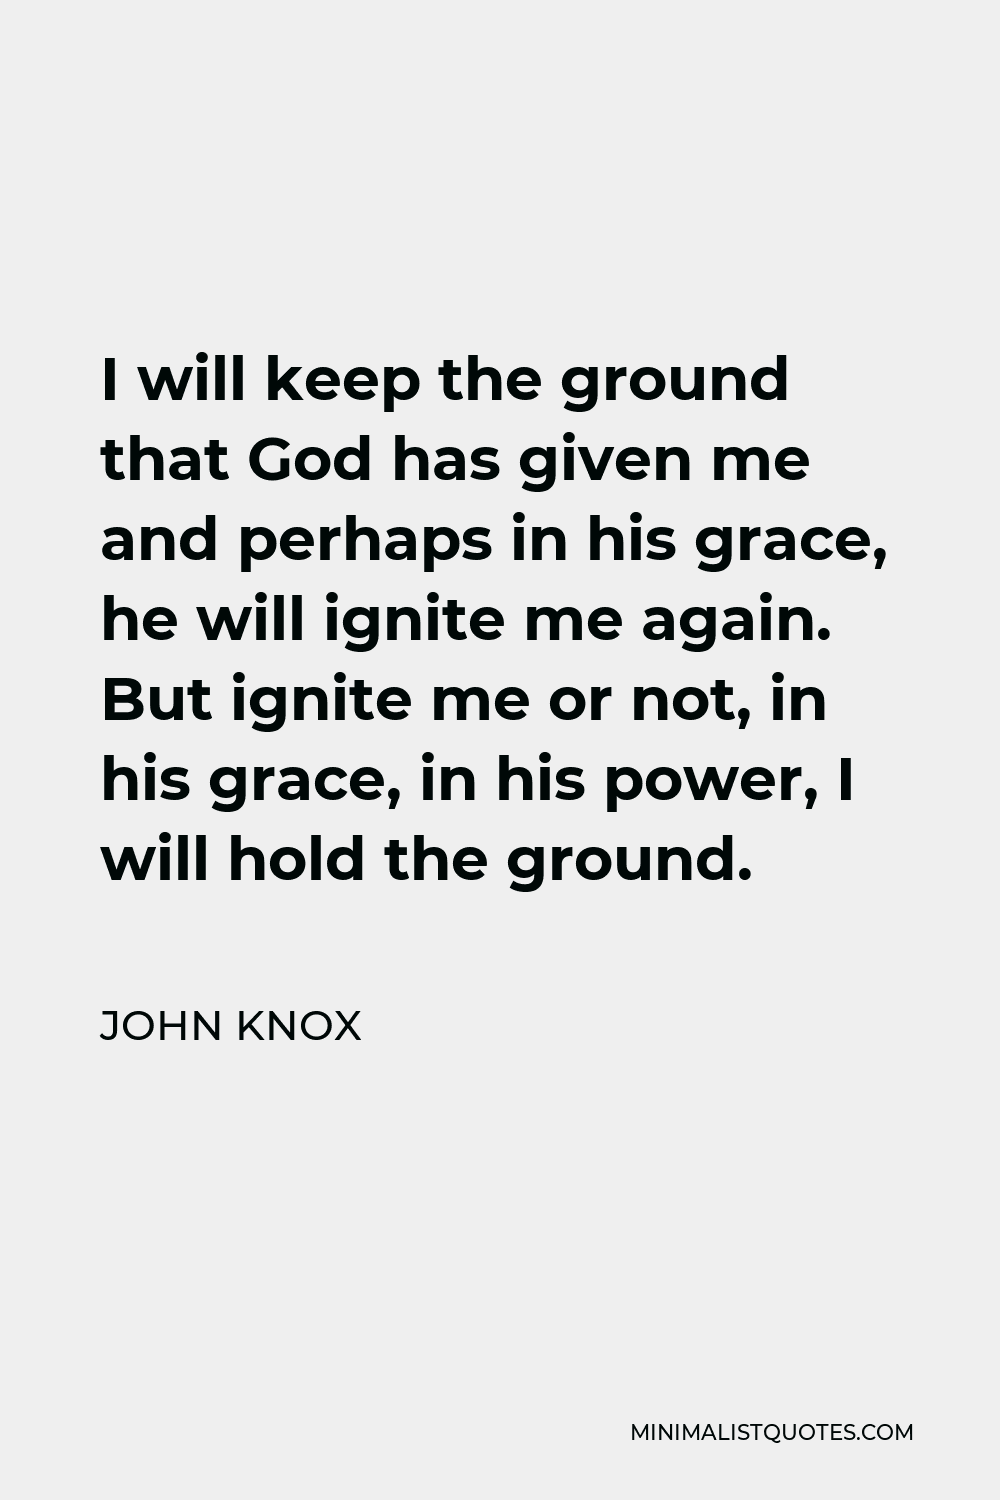 John Knox Quote - I will keep the ground that God has given me and perhaps in his grace, he will ignite me again. But ignite me or not, in his grace, in his power, I will hold the ground.